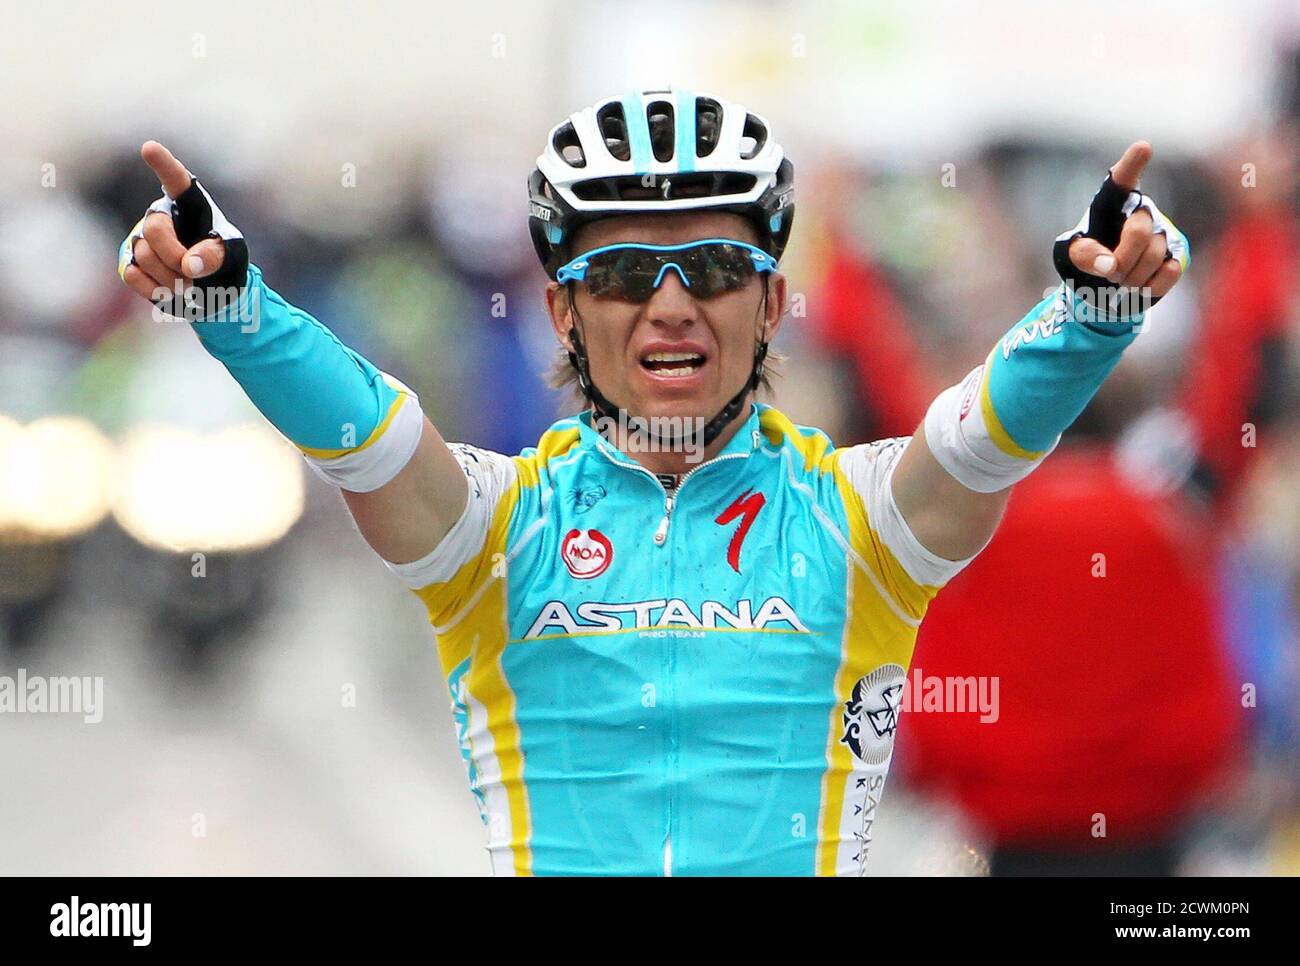 Astana Pro Team rider Maxim Iglinskiy of Kazakhstan celebrates on the  podium after winning the Liege-Bastogne-Liege Classic cycling race in Ans  near in Liege April 22, 2012. Iglinskiy of Kazakhstan won the